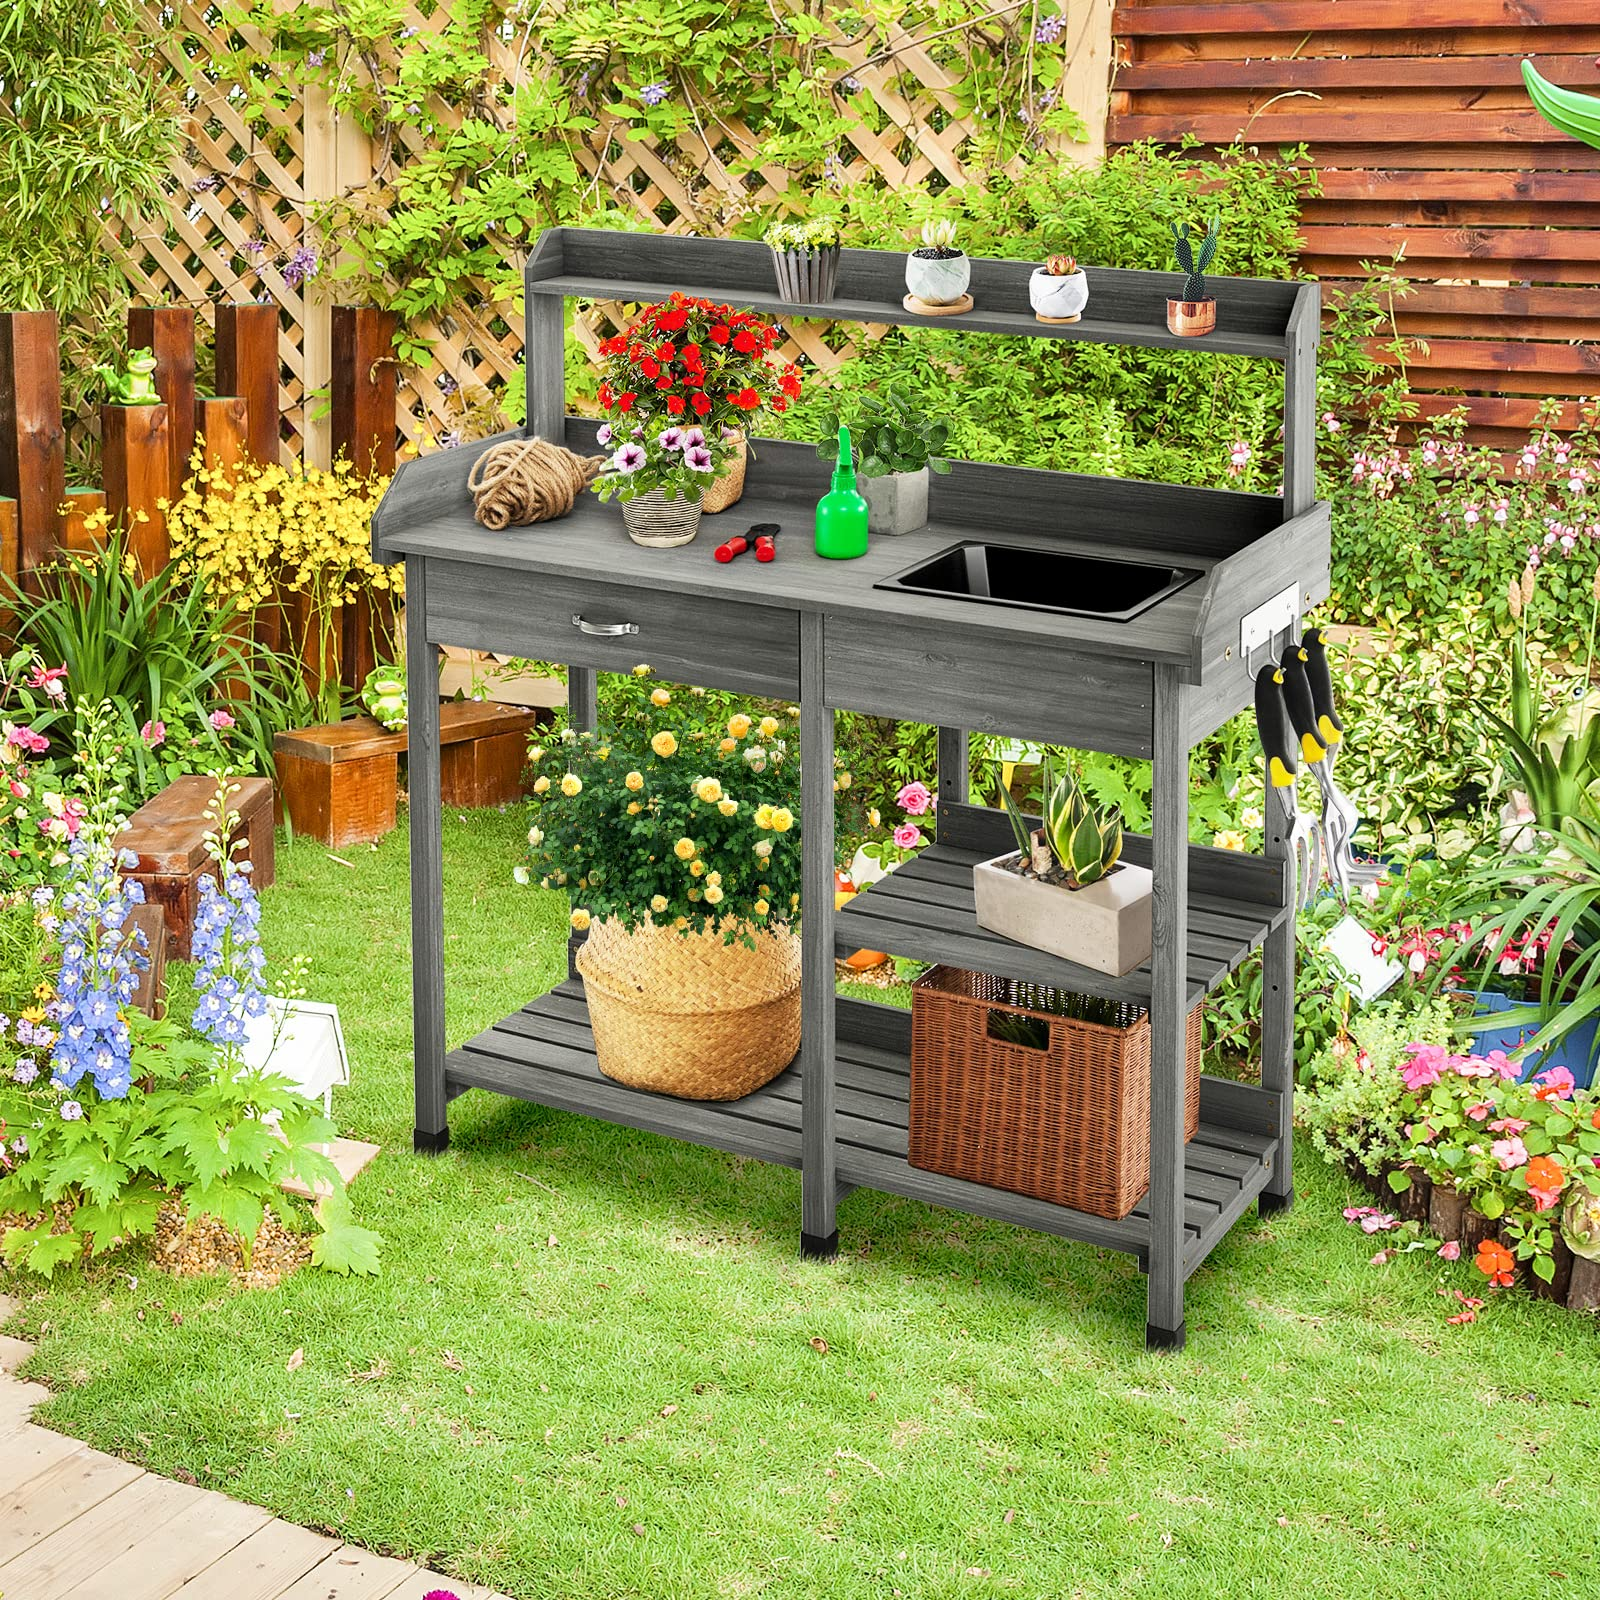 Giantex Potting Bench Table, Wood Garden Work Table with Sink Drawer Hooks and 3 Storage Shelves